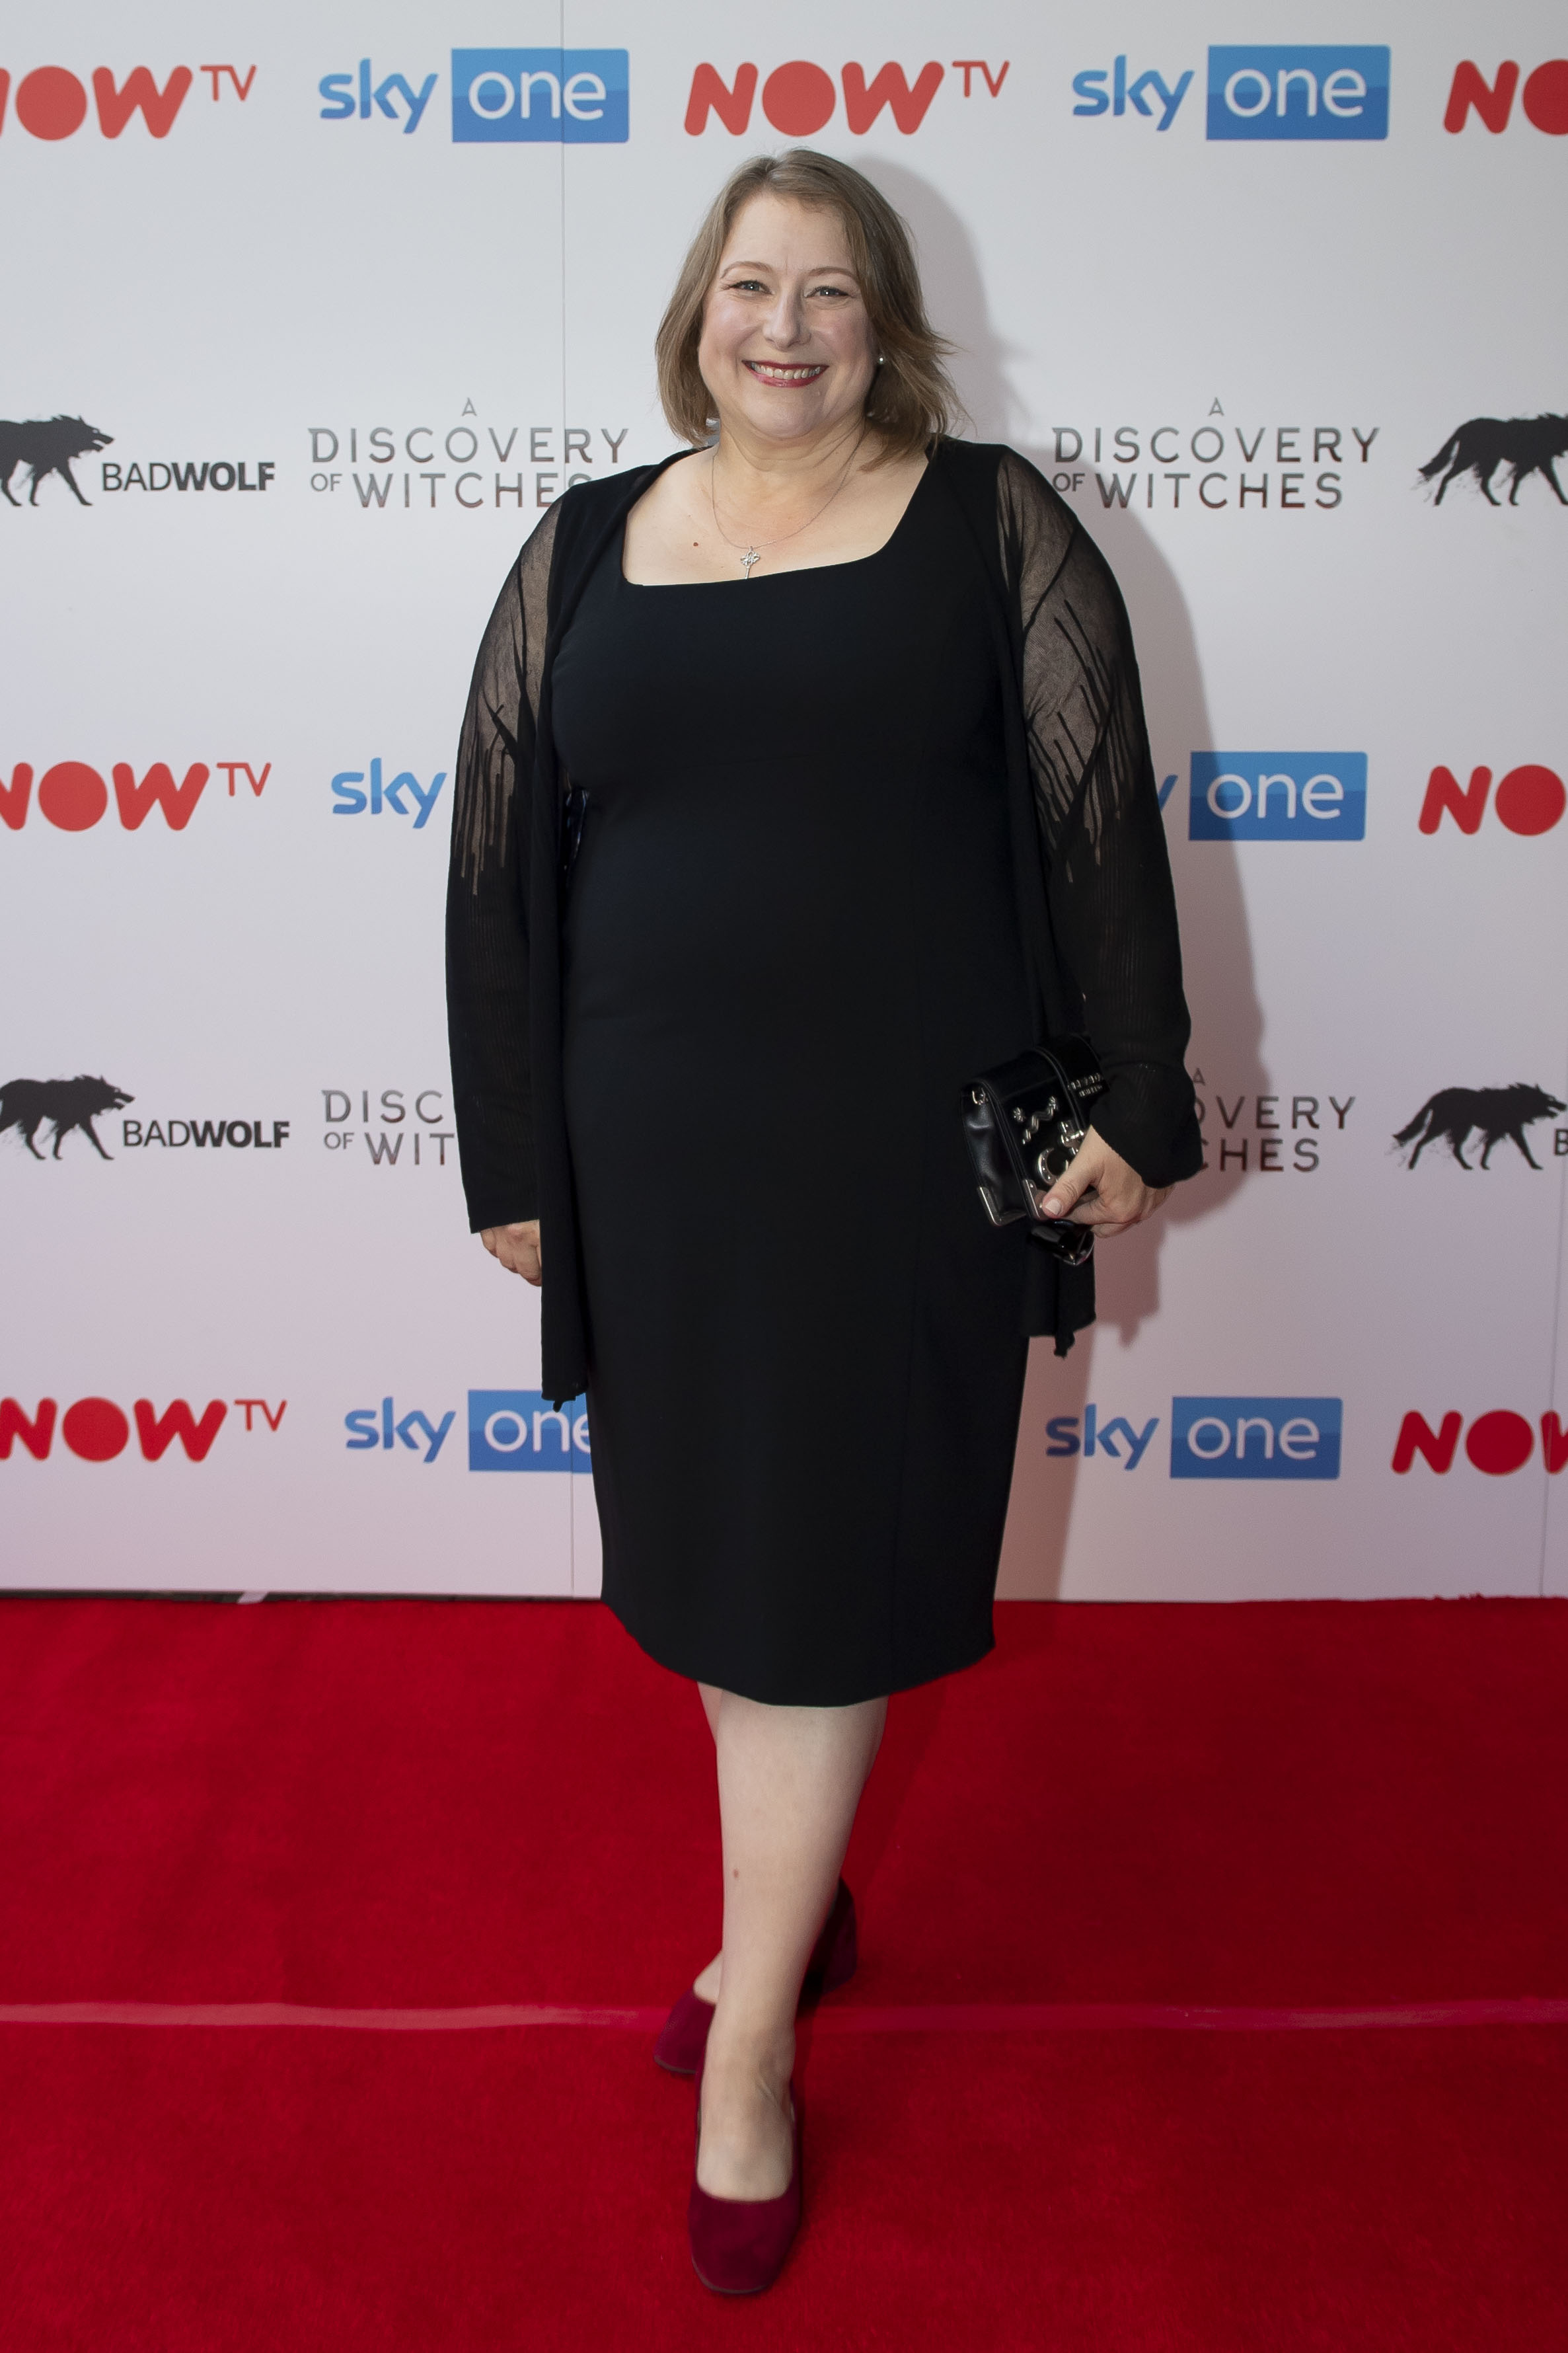  CARDIFF, WALES - SEPTEMBER 05: Author Deborah Harkness attends the UK Premiere of 'A Discovery Of Witches' at Cineworld on September 5, 2018 in Cardiff, Wales. (Photo by Matthew Horwood/Getty Images) 